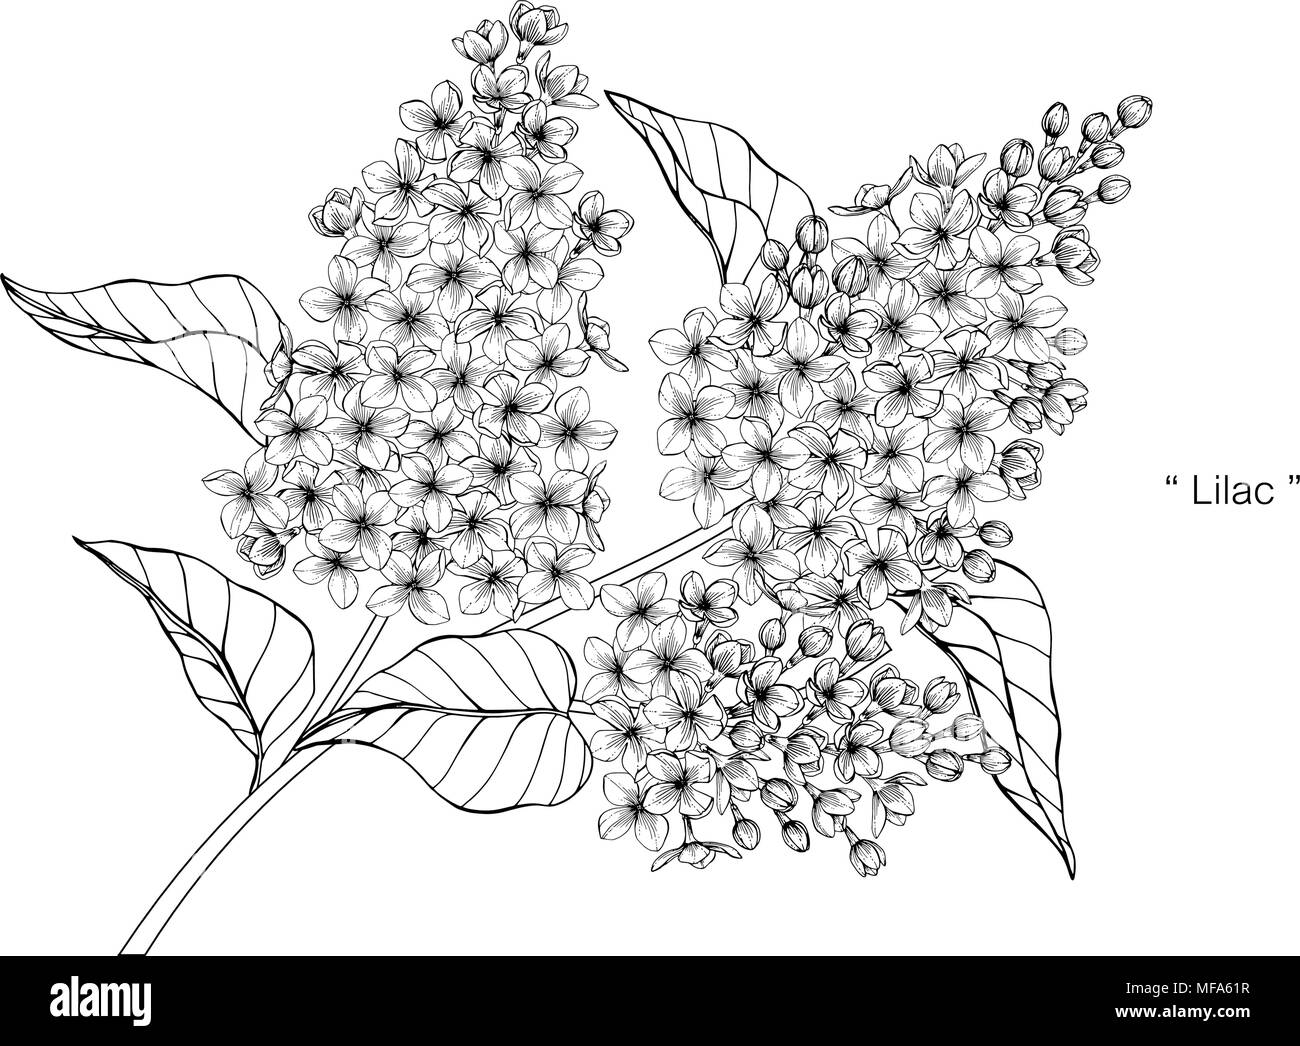 Lilac Flower Drawing Illustration Black And White With Line Art On White Backgrounds Stock Vector Image Art Alamy